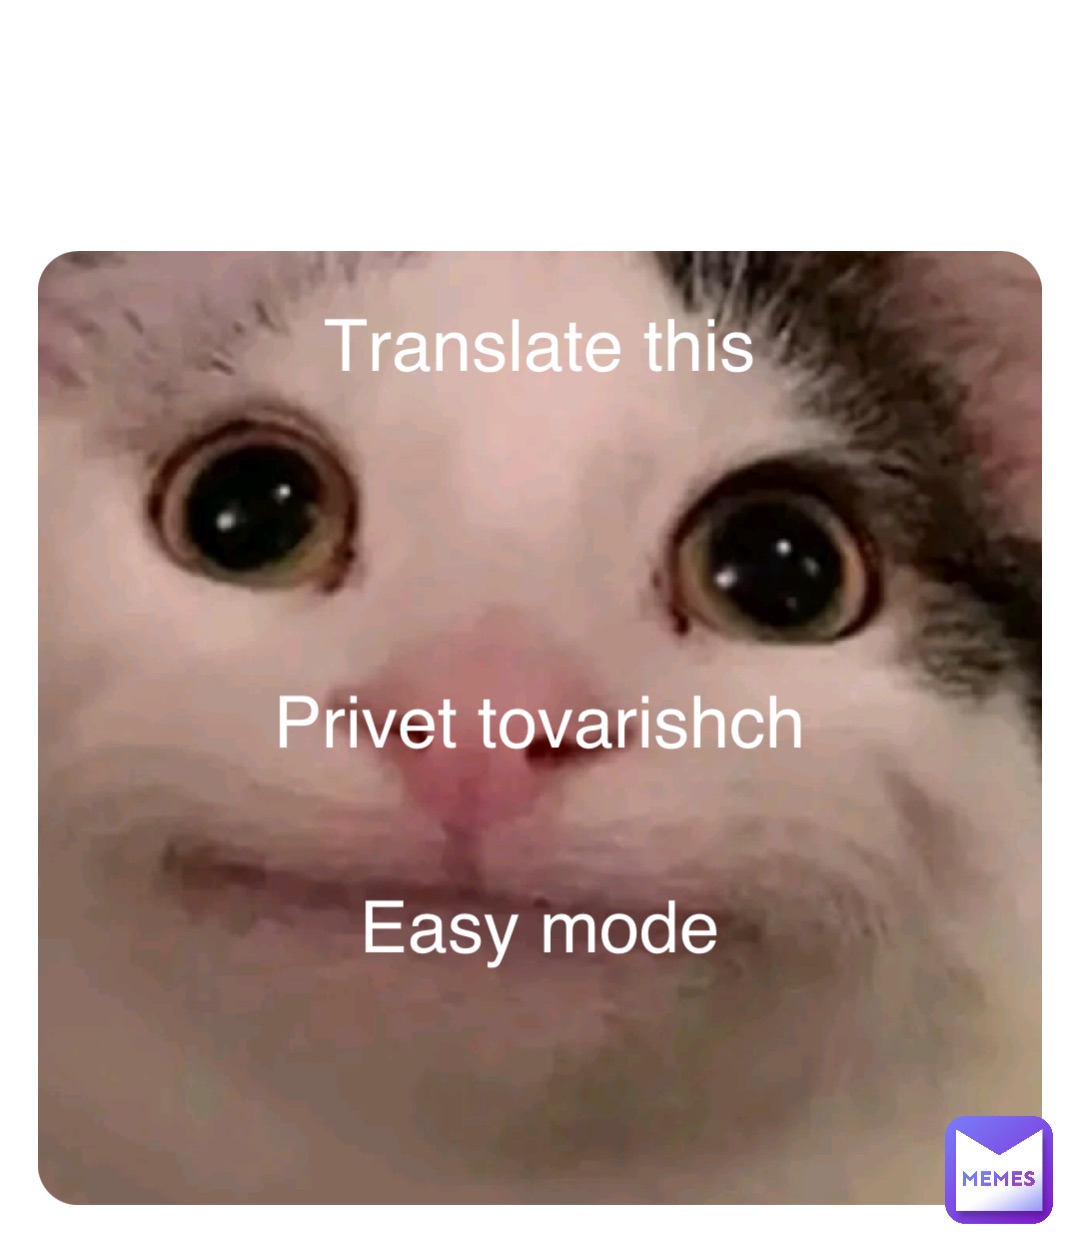 Double tap to edit Translate this Privet tovarishch Easy mode